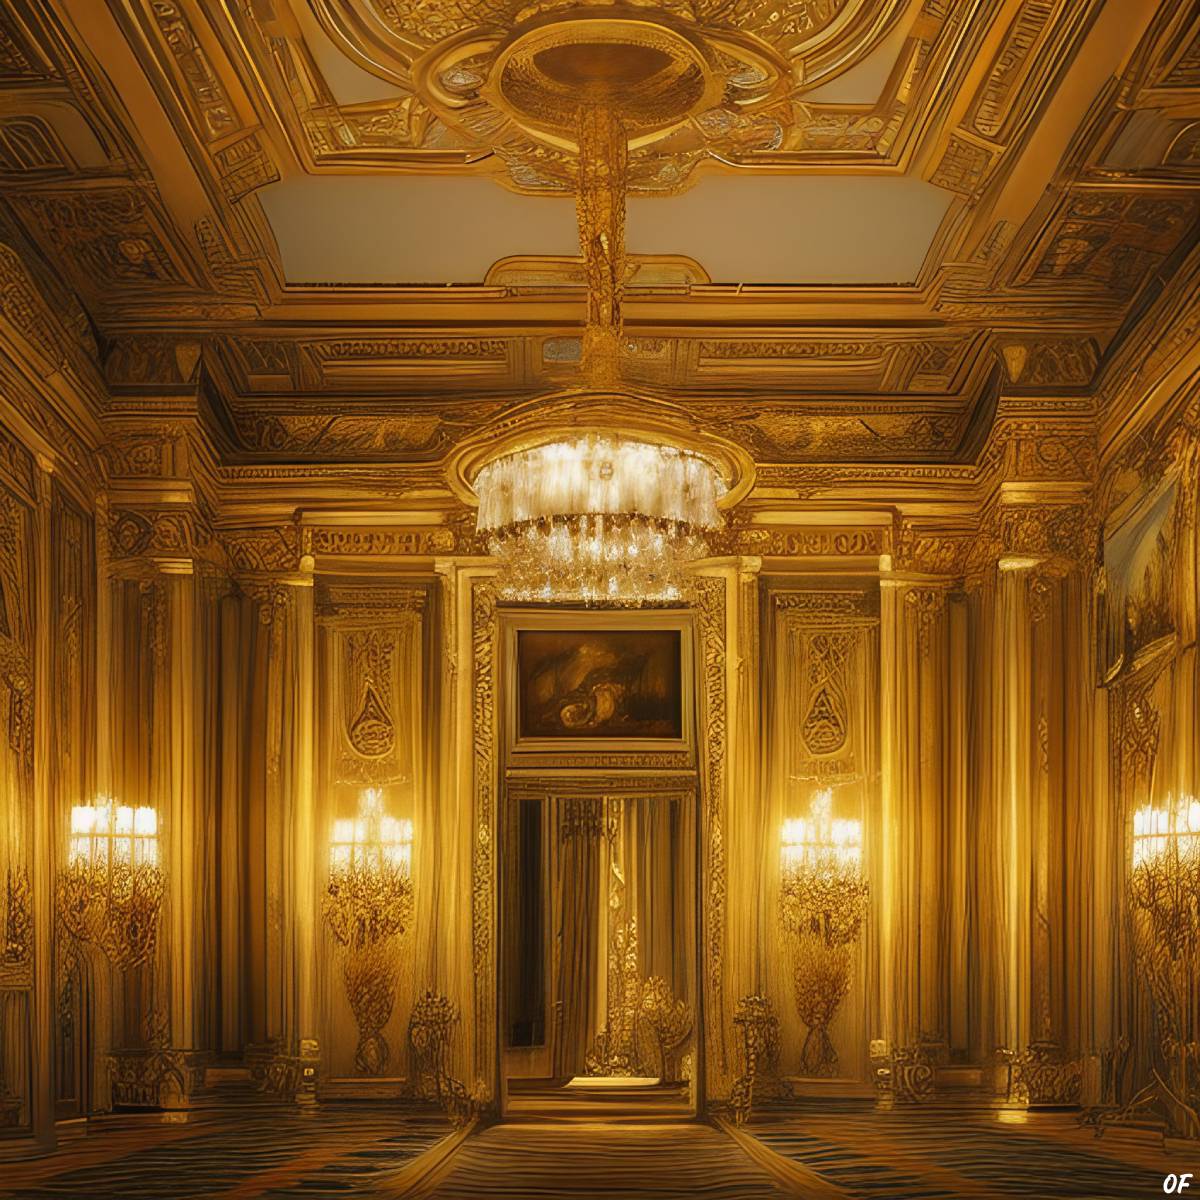 An artists re-imagining of the original Amber Room.